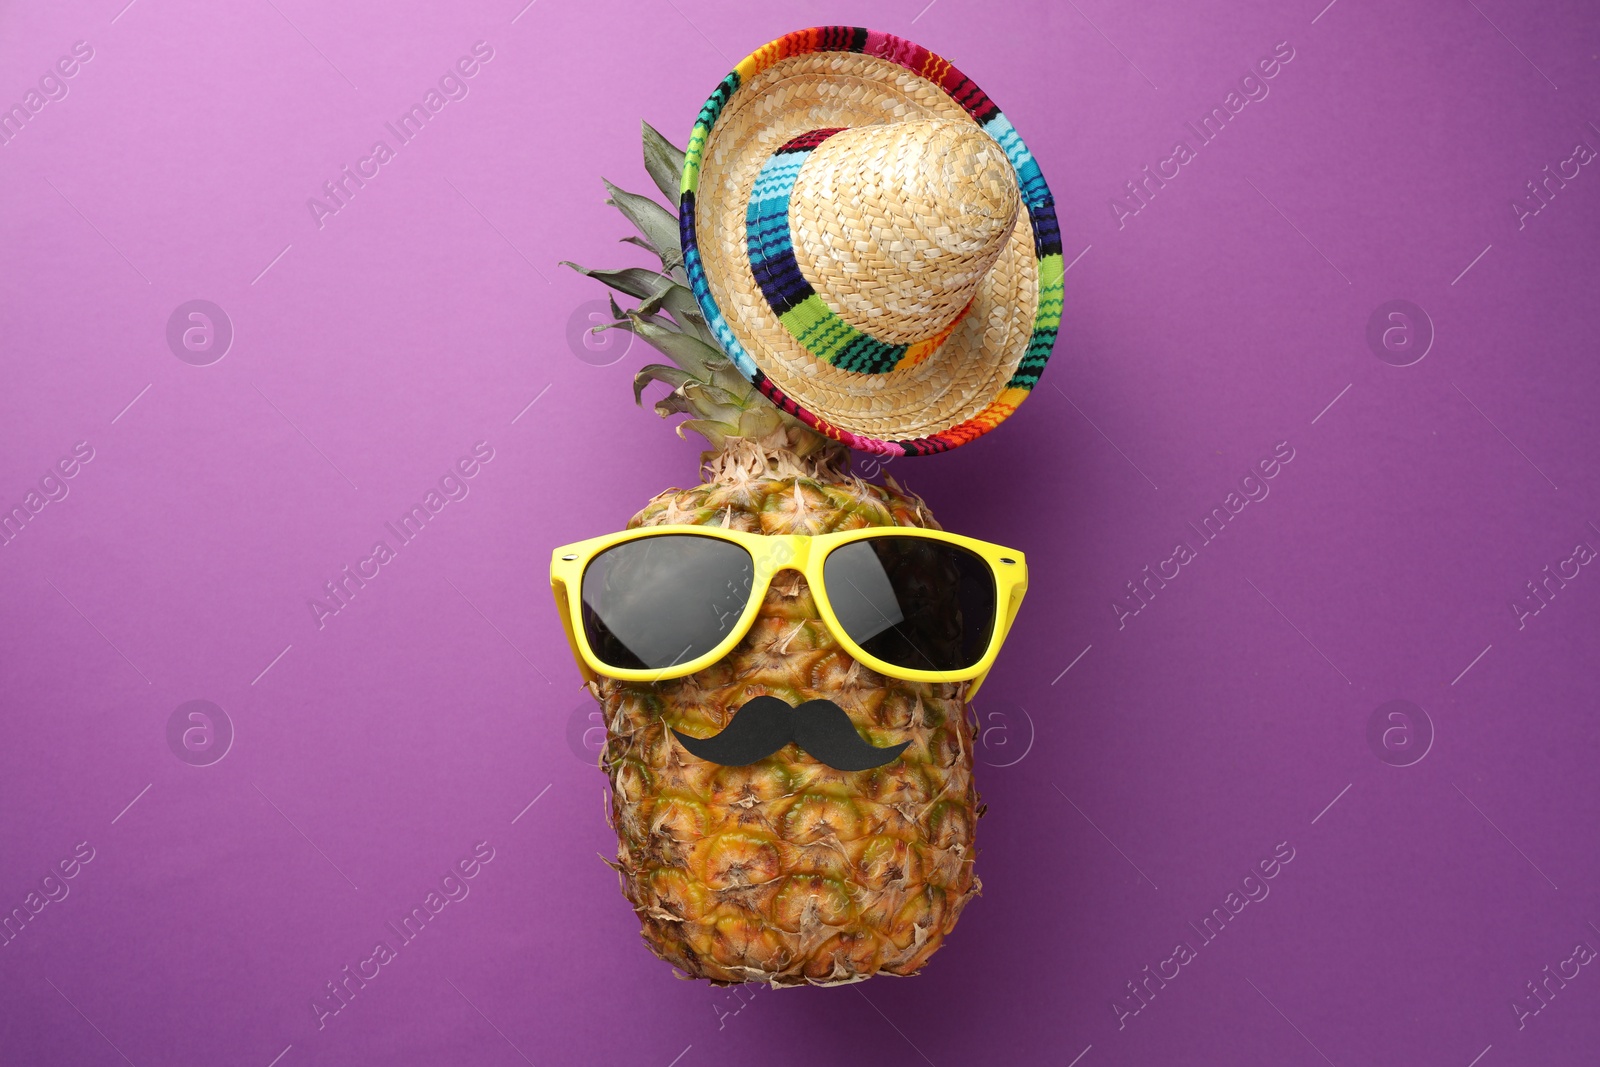 Photo of Pineapple with Mexican sombrero hat, fake mustache and sunglasses on purple background, flat lay